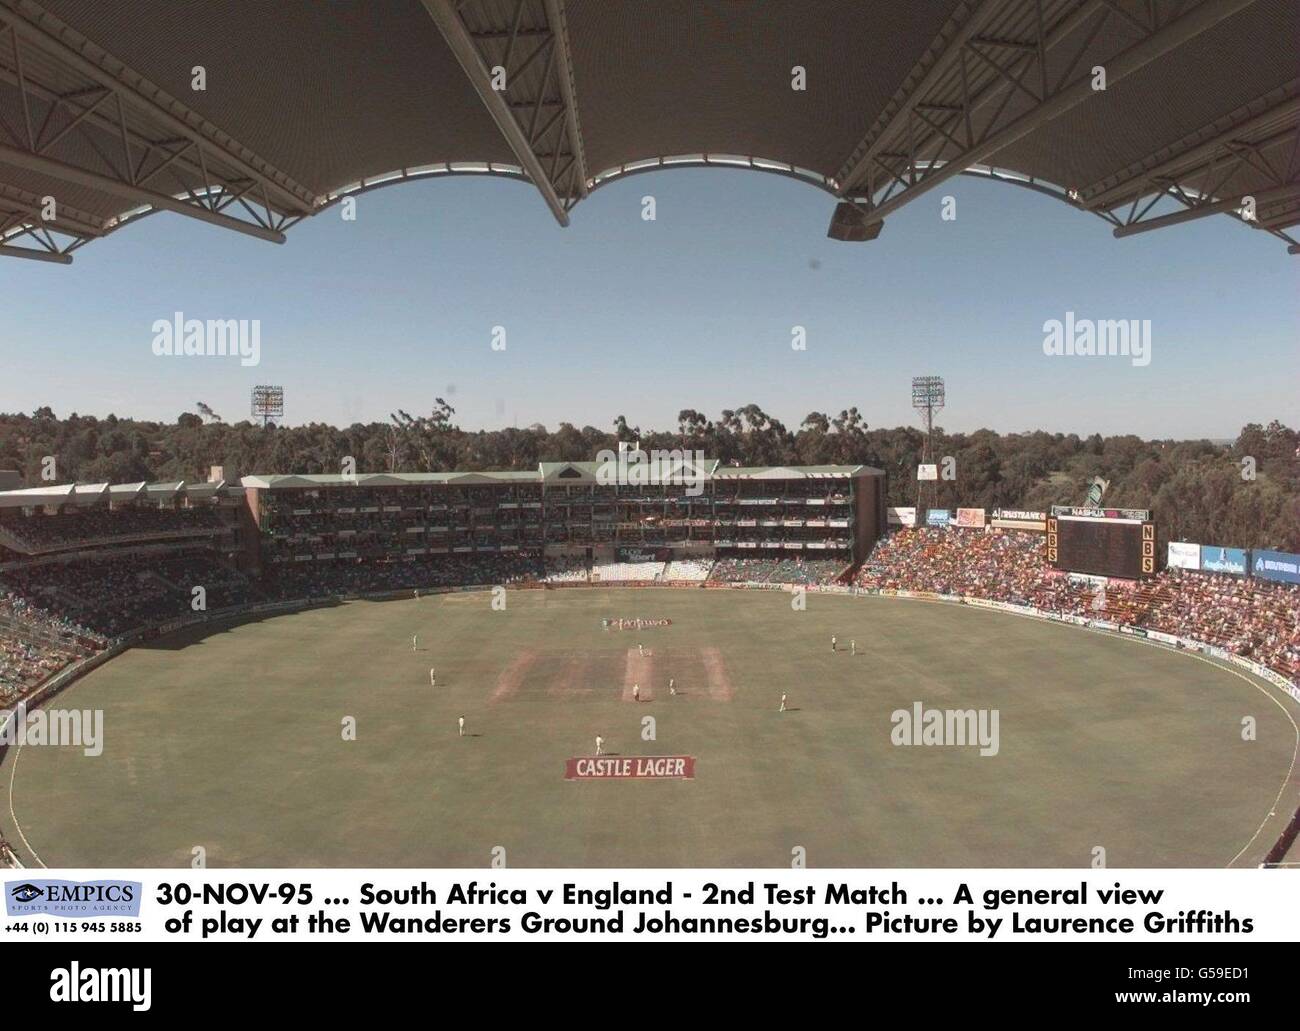 30-NOV-95 ... South Africa v England - 2nd Test Match ... A general view of play at the Wanderers Ground Johannesburg. Picture by Laurence Griffiths Stock Photo